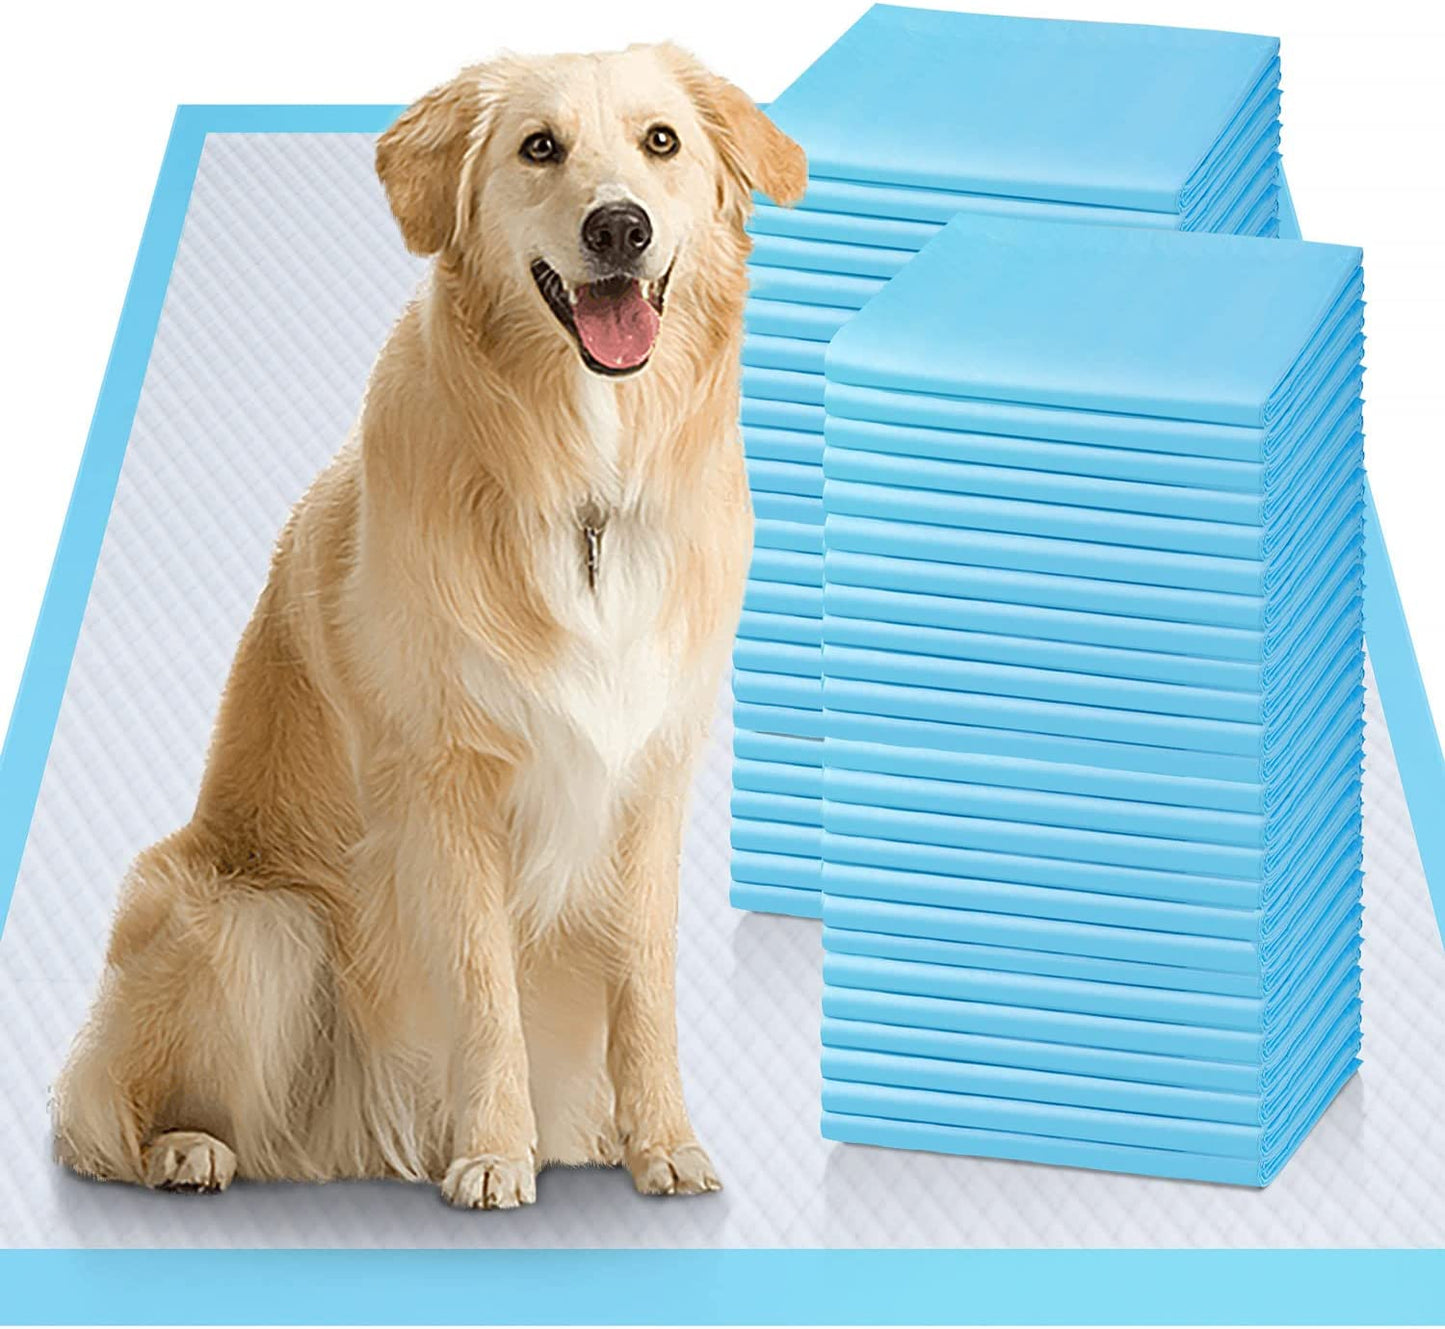 Quick Dry Thicken 6 Layers Ultra Absorbent Dog Pee Pads Leak-Proof Odor-Control Puppy Training Pads